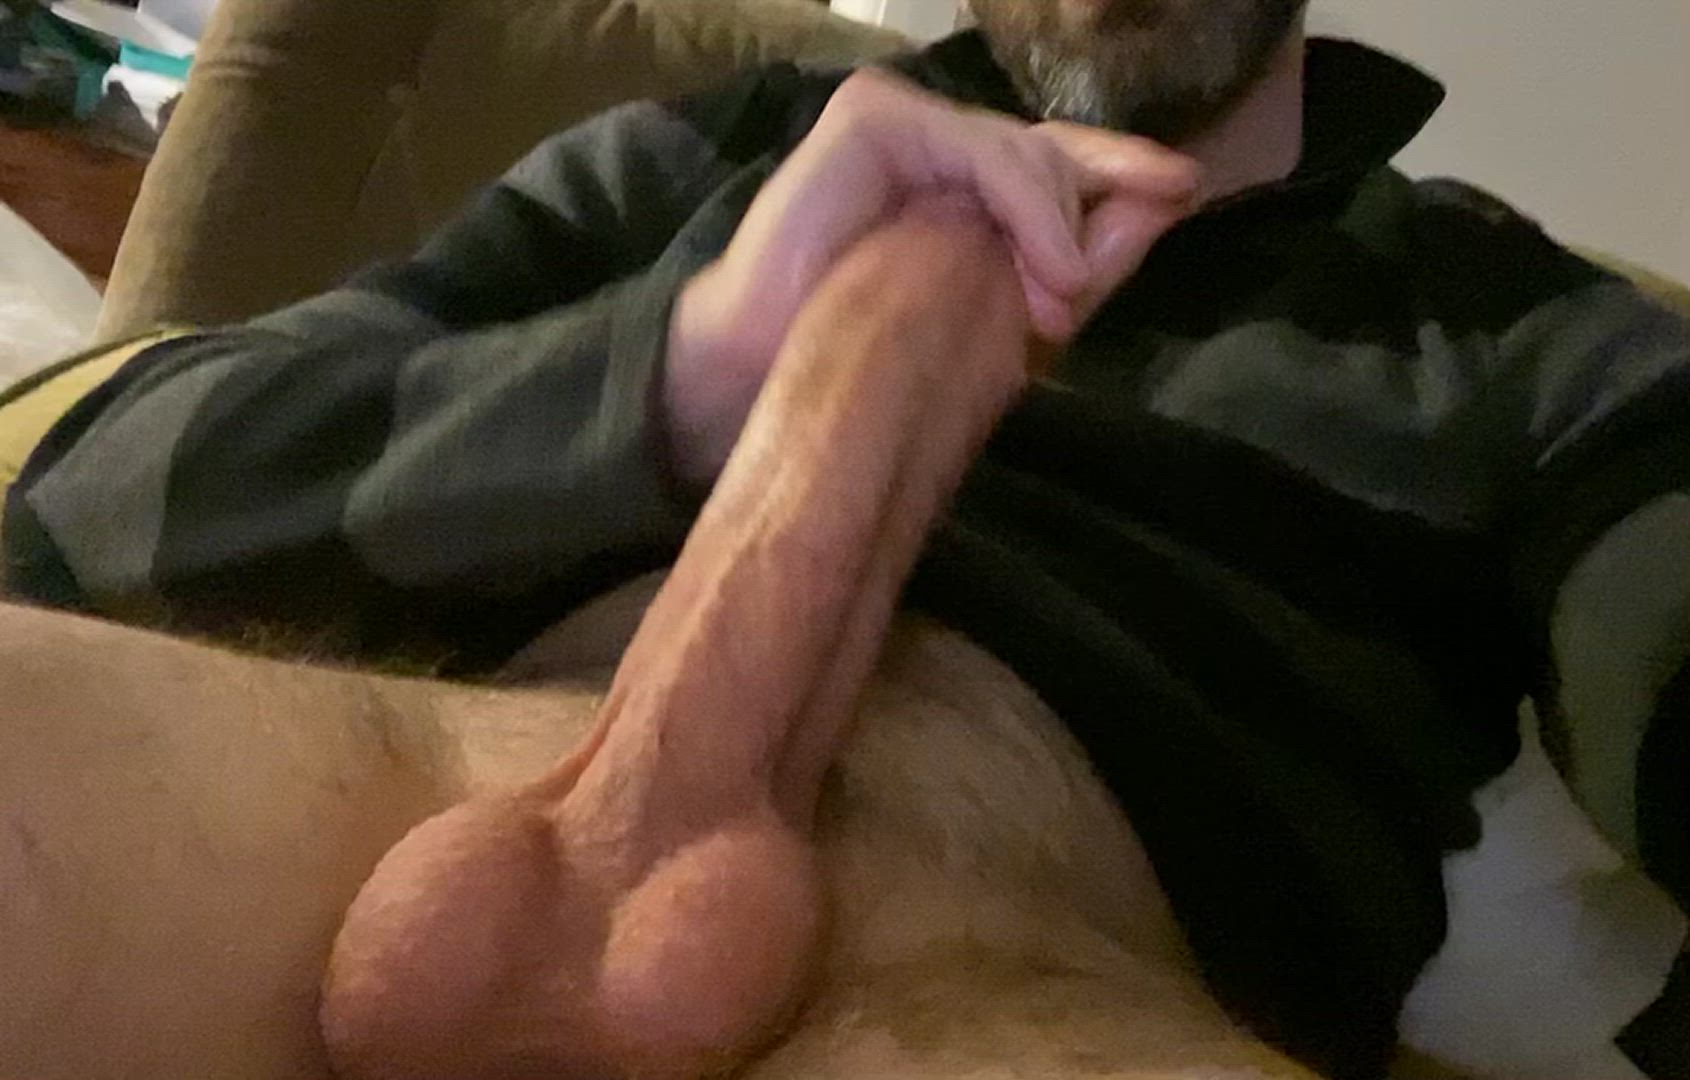 Big Dick porn video with onlyfans model JM <strong>@jmexhibitions</strong>